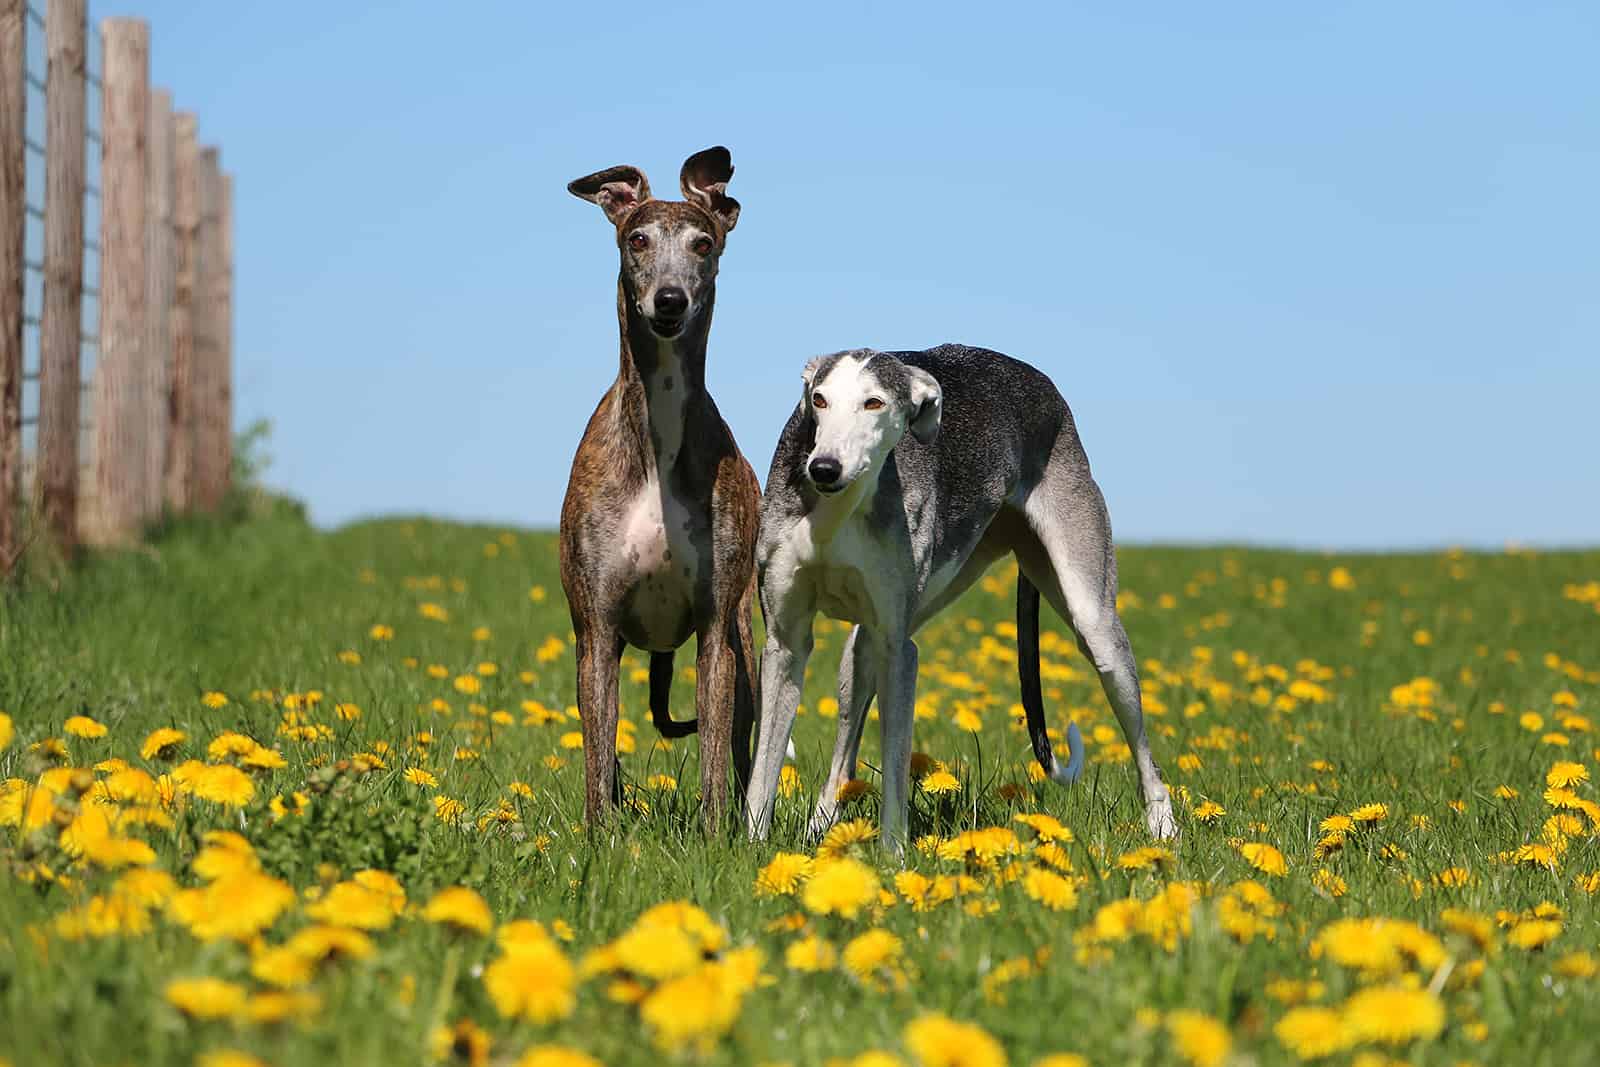 two whippet dogs in different color standing in a field of dandelions